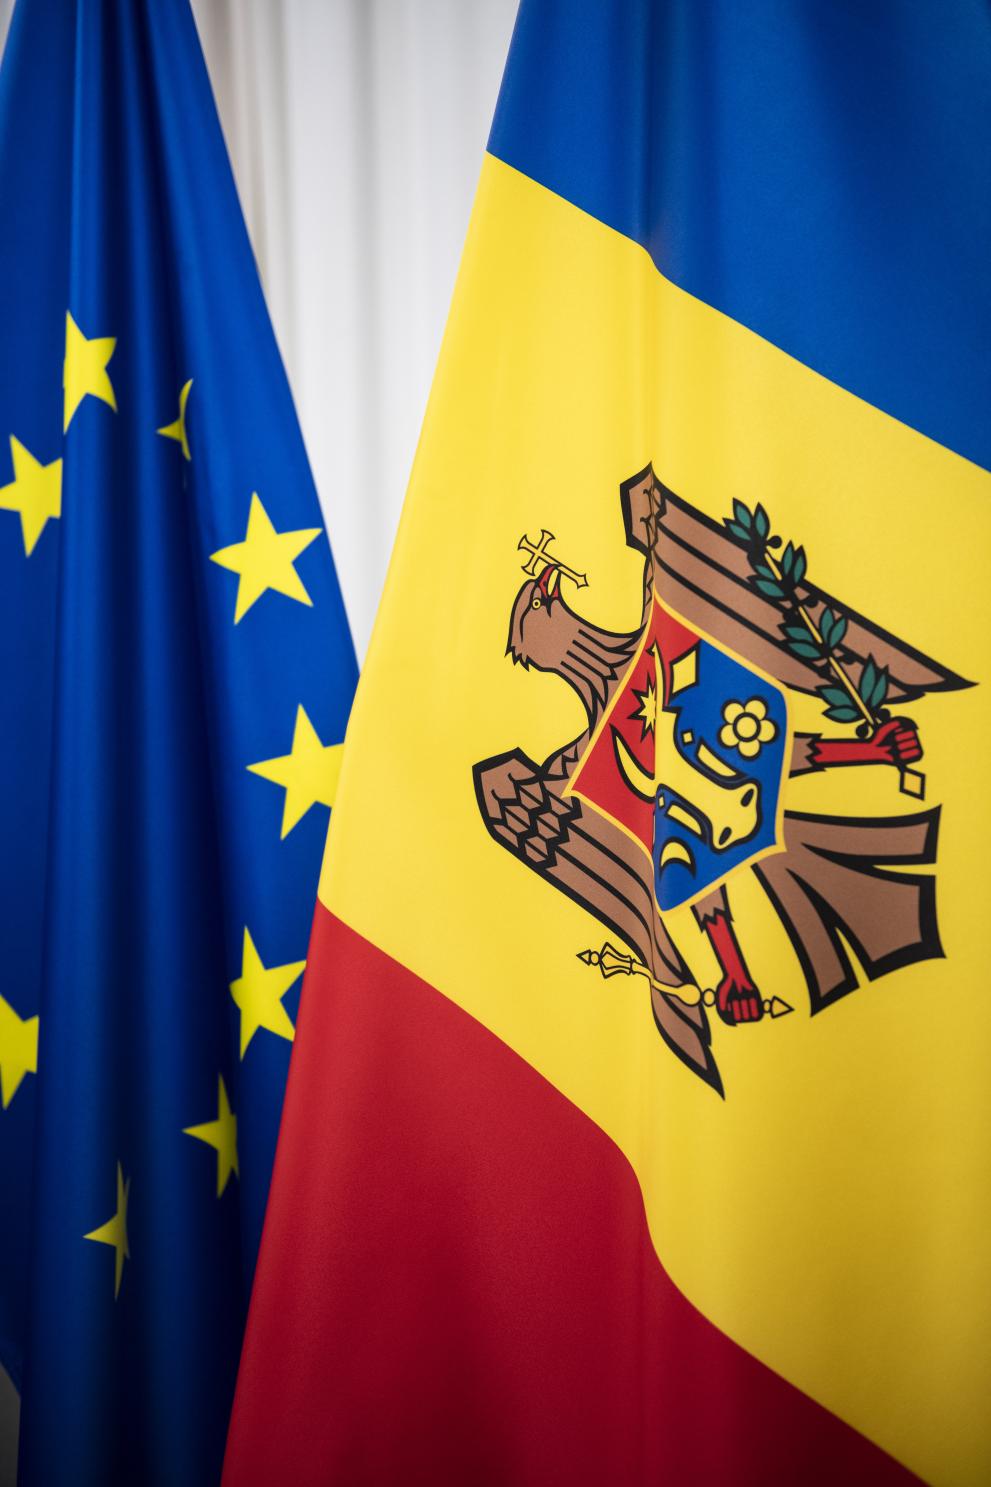 The European and Moldovian flags